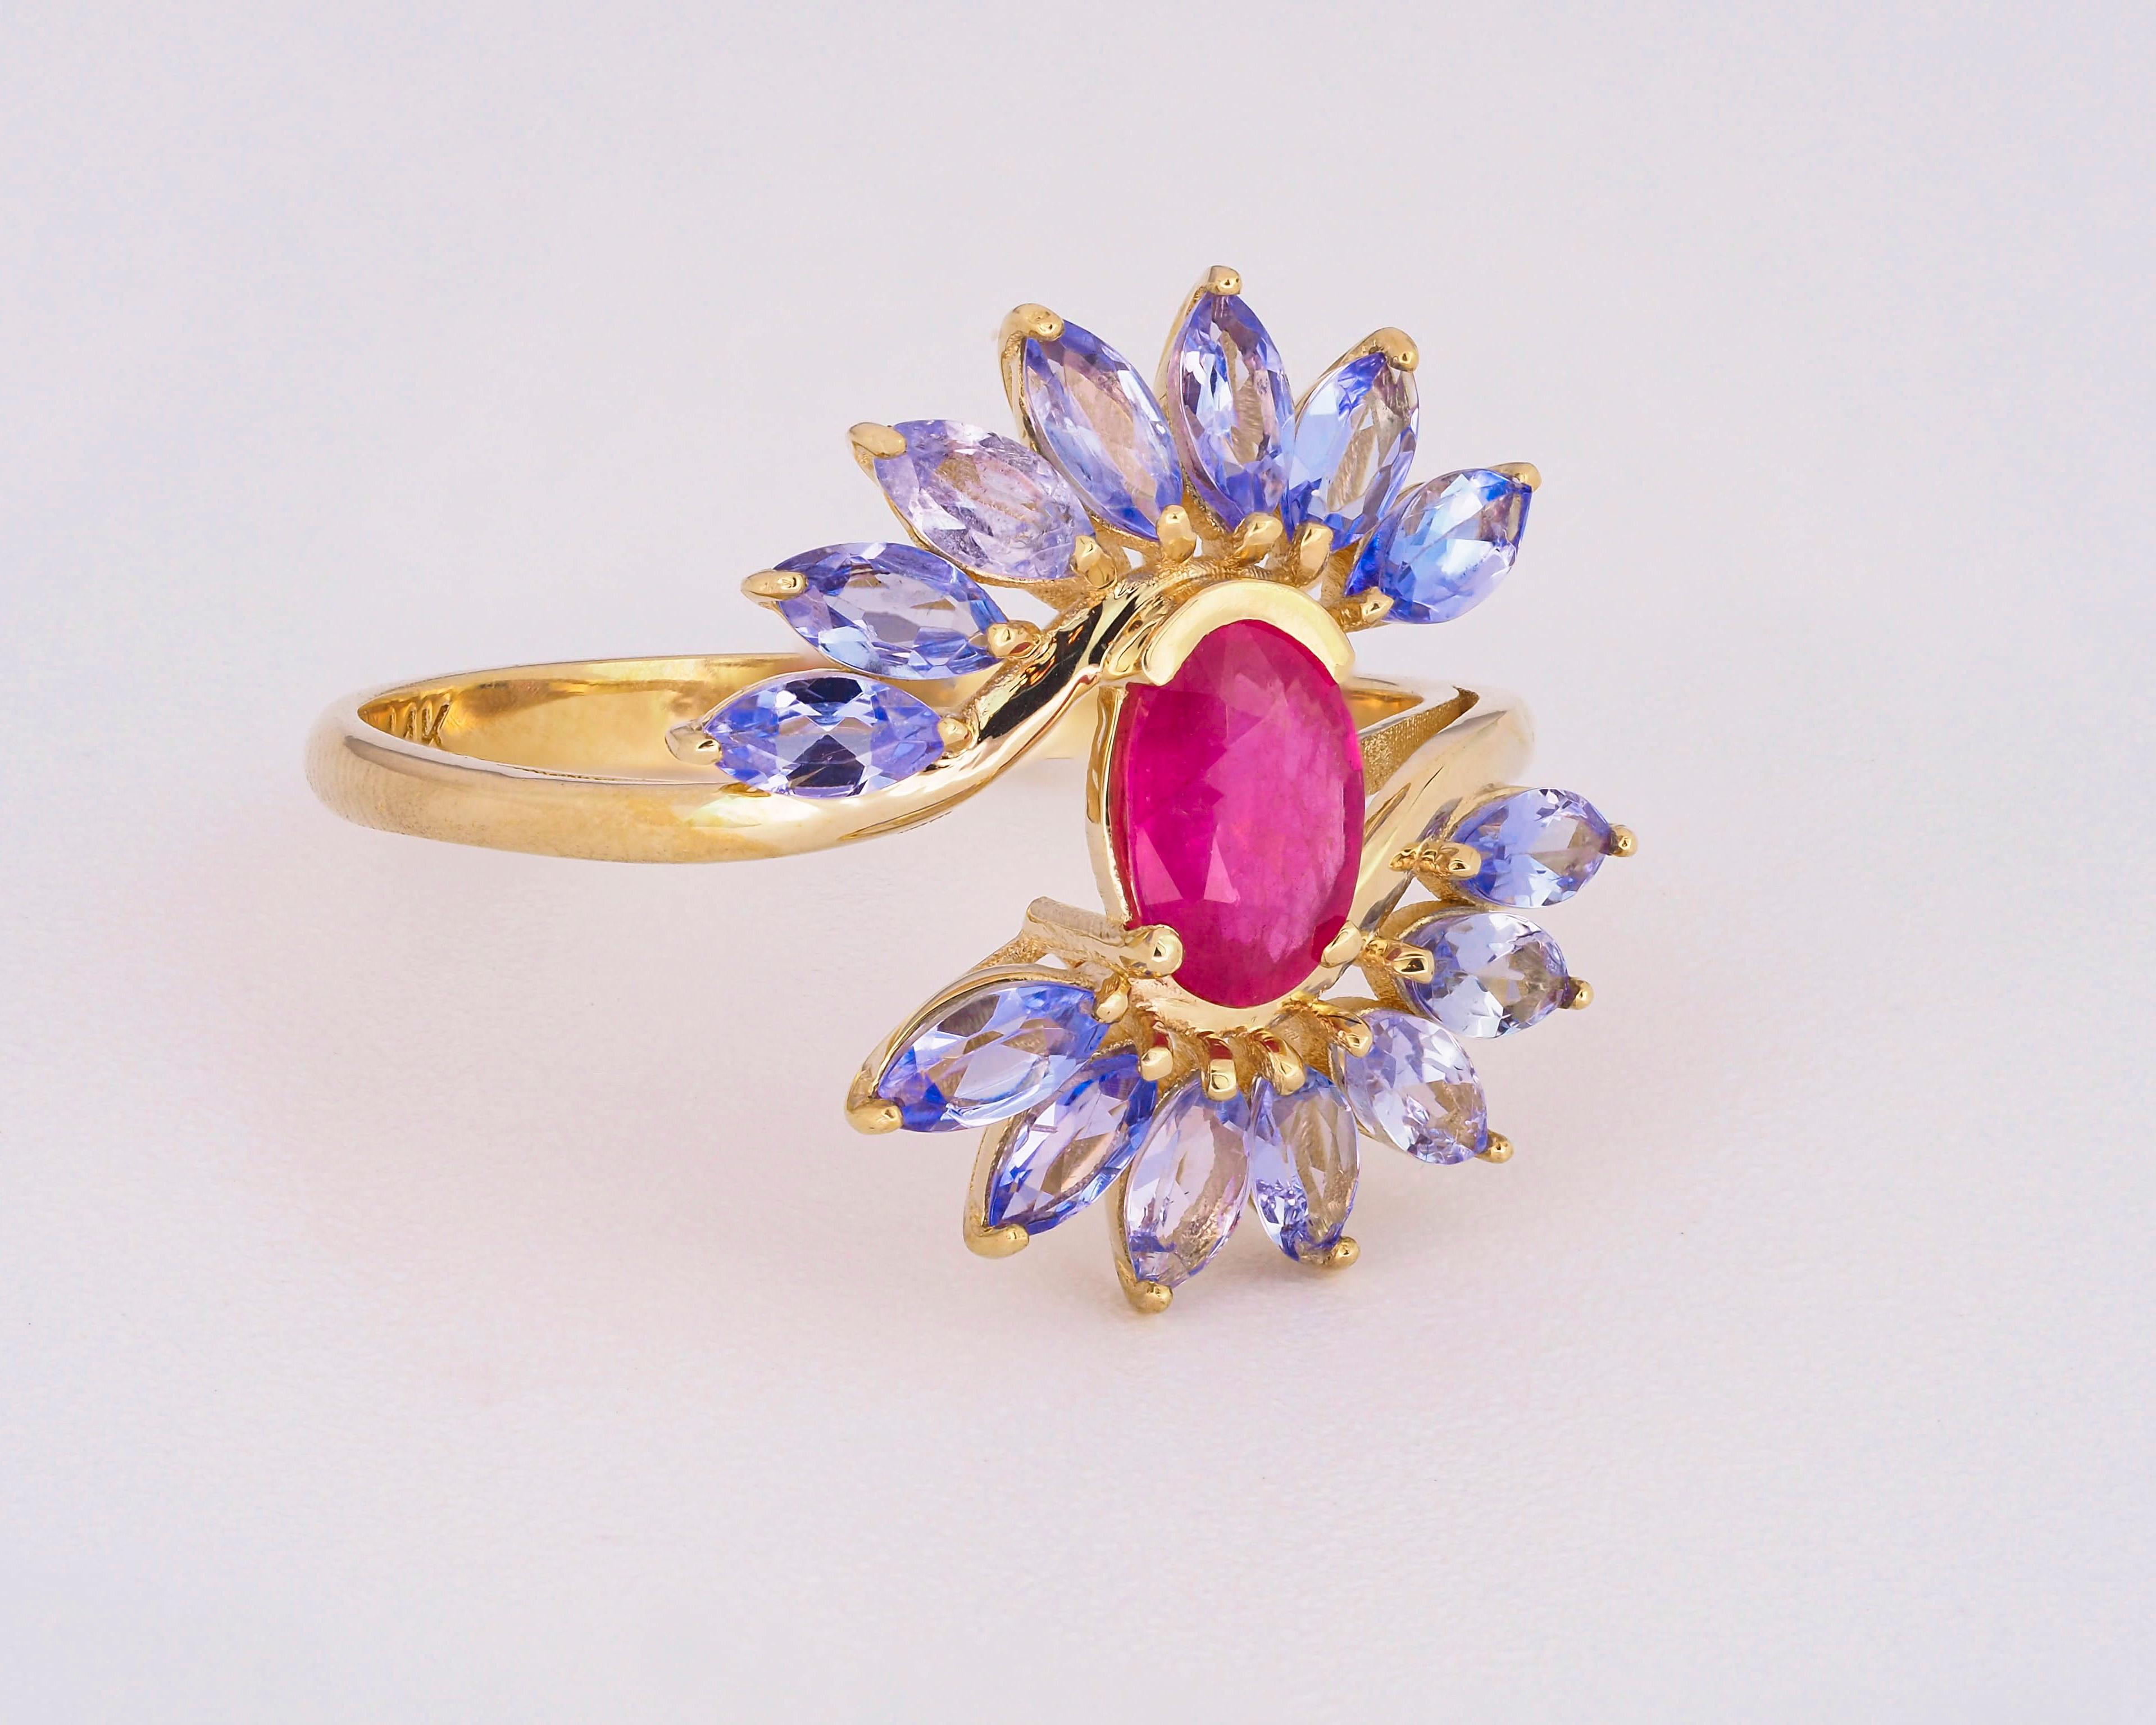 For Sale:  14 karat Gold Ring with Ruby and Tanzanites. Oval ruby ring. Tanzanite ring! 2